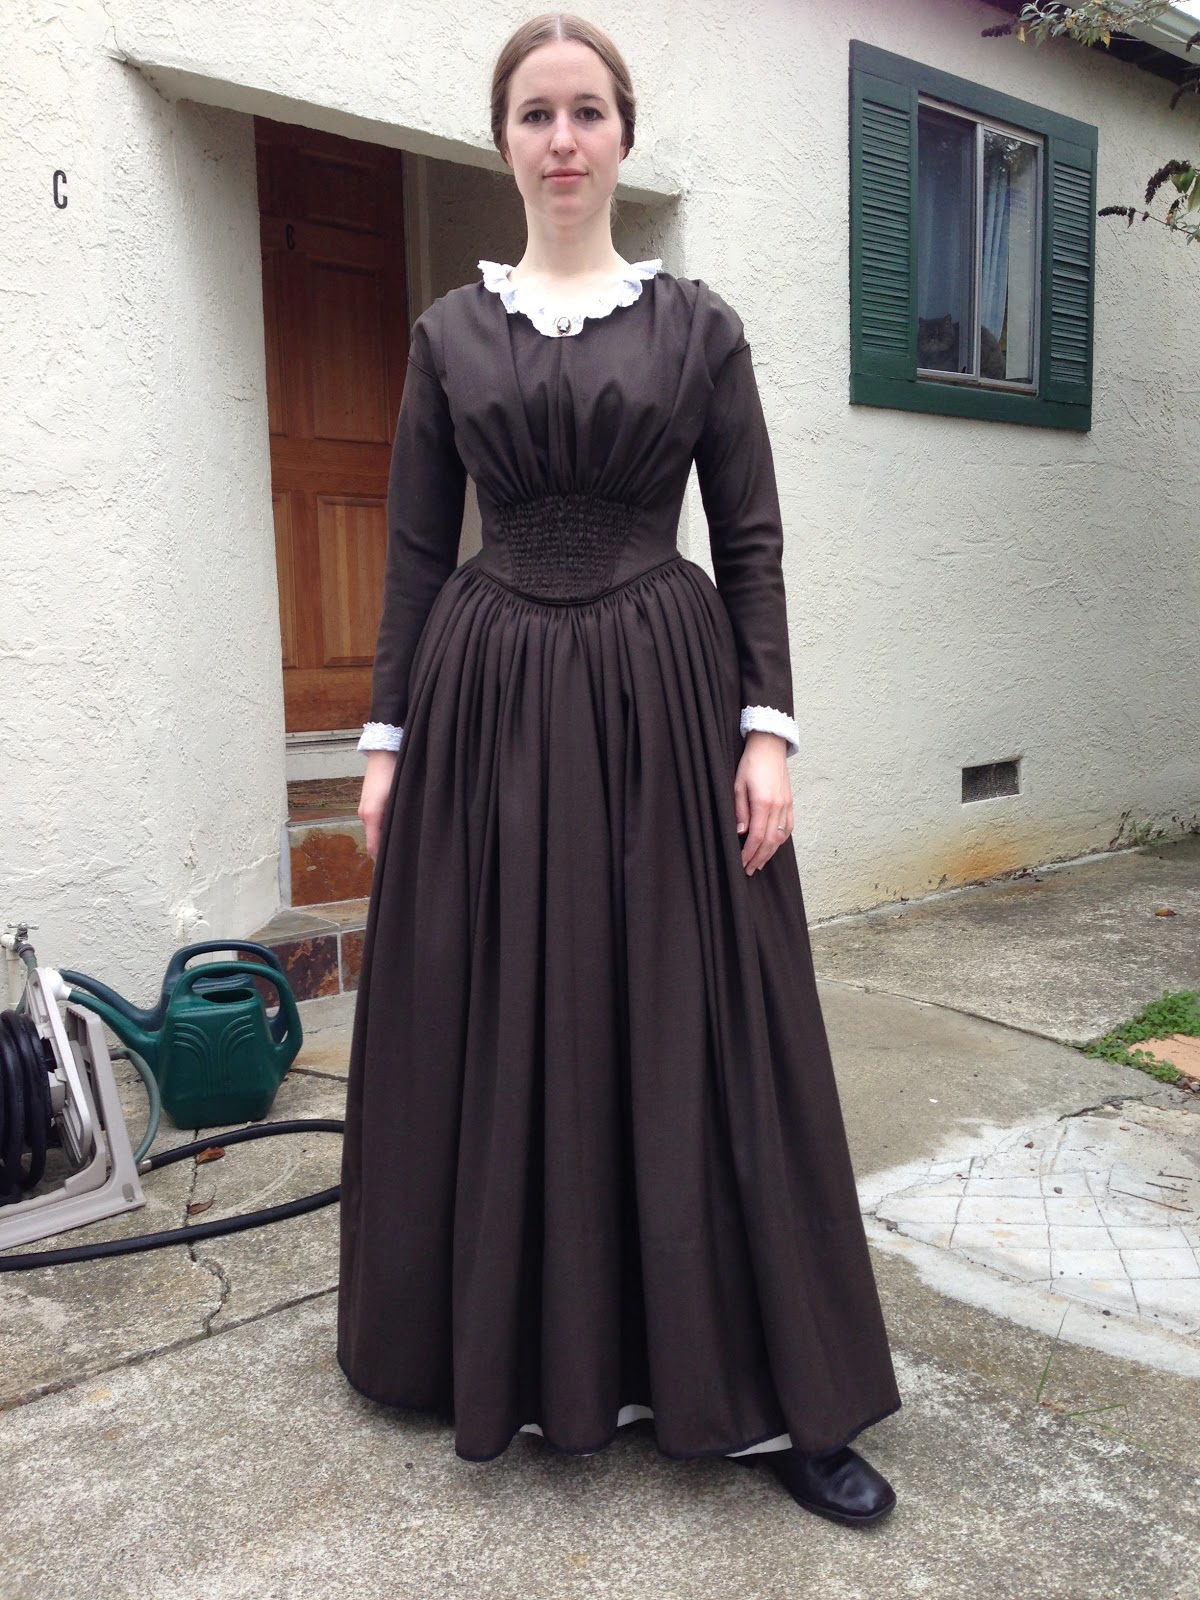 Frolicking Frocks: 1840s Day Dress